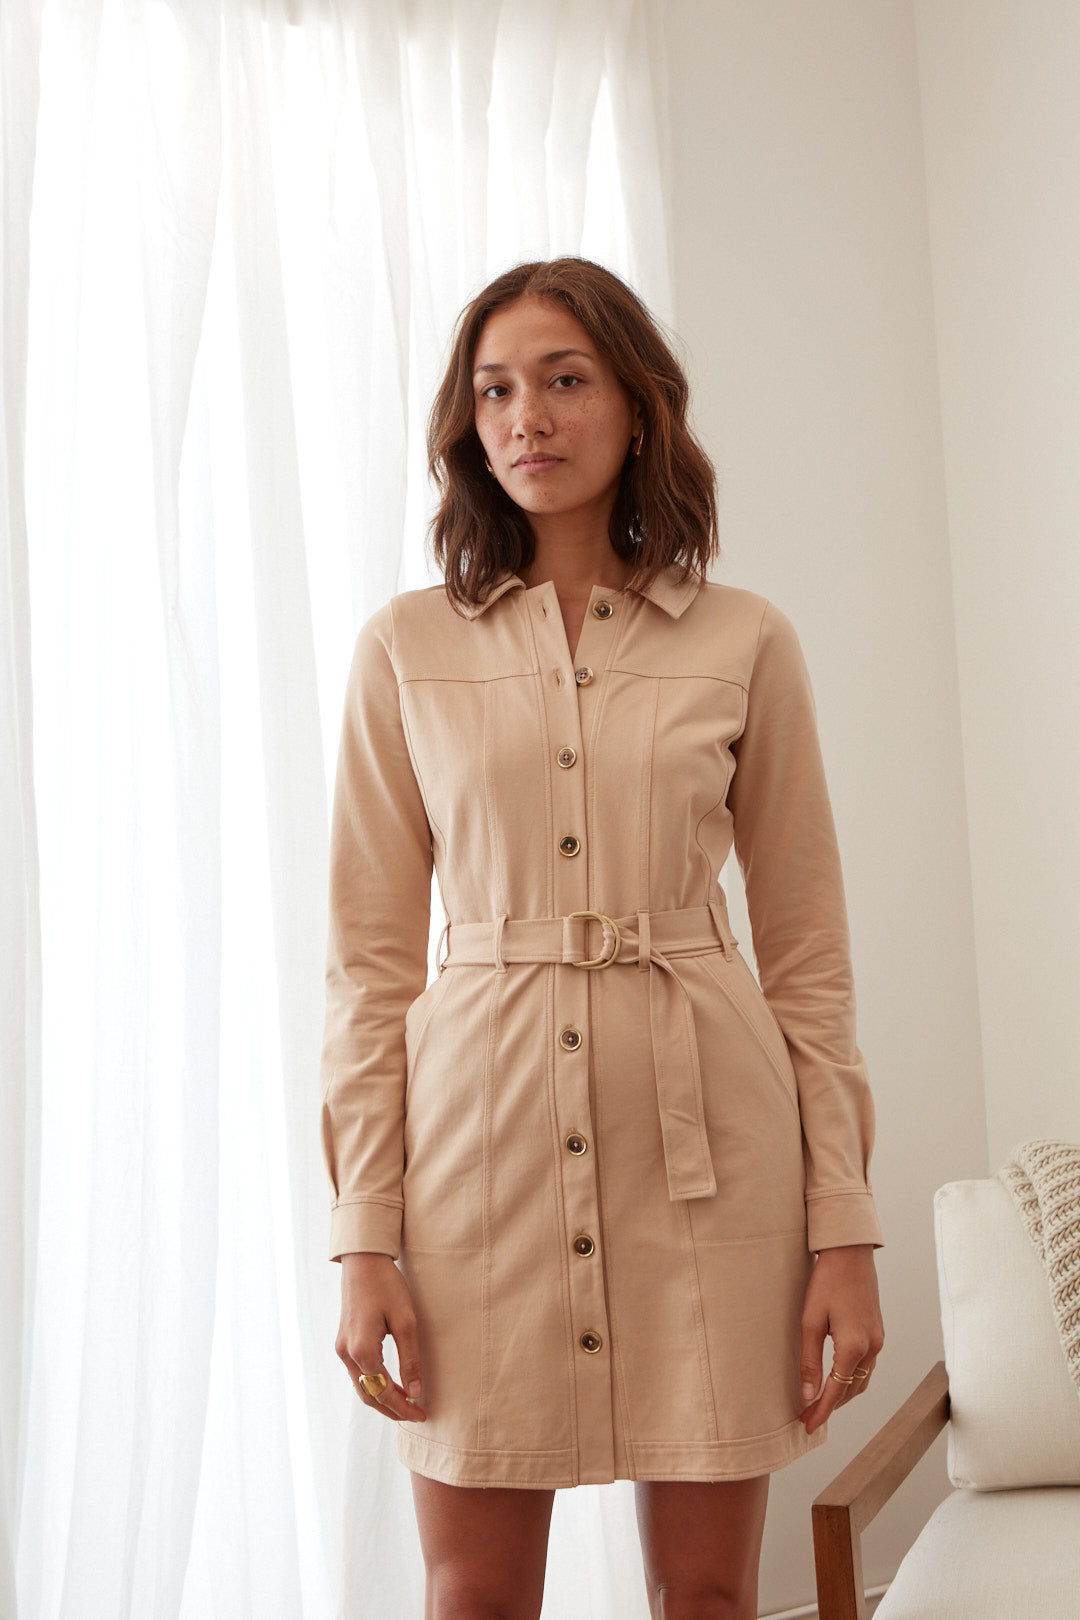 back to work fall dress cotton button down in tan